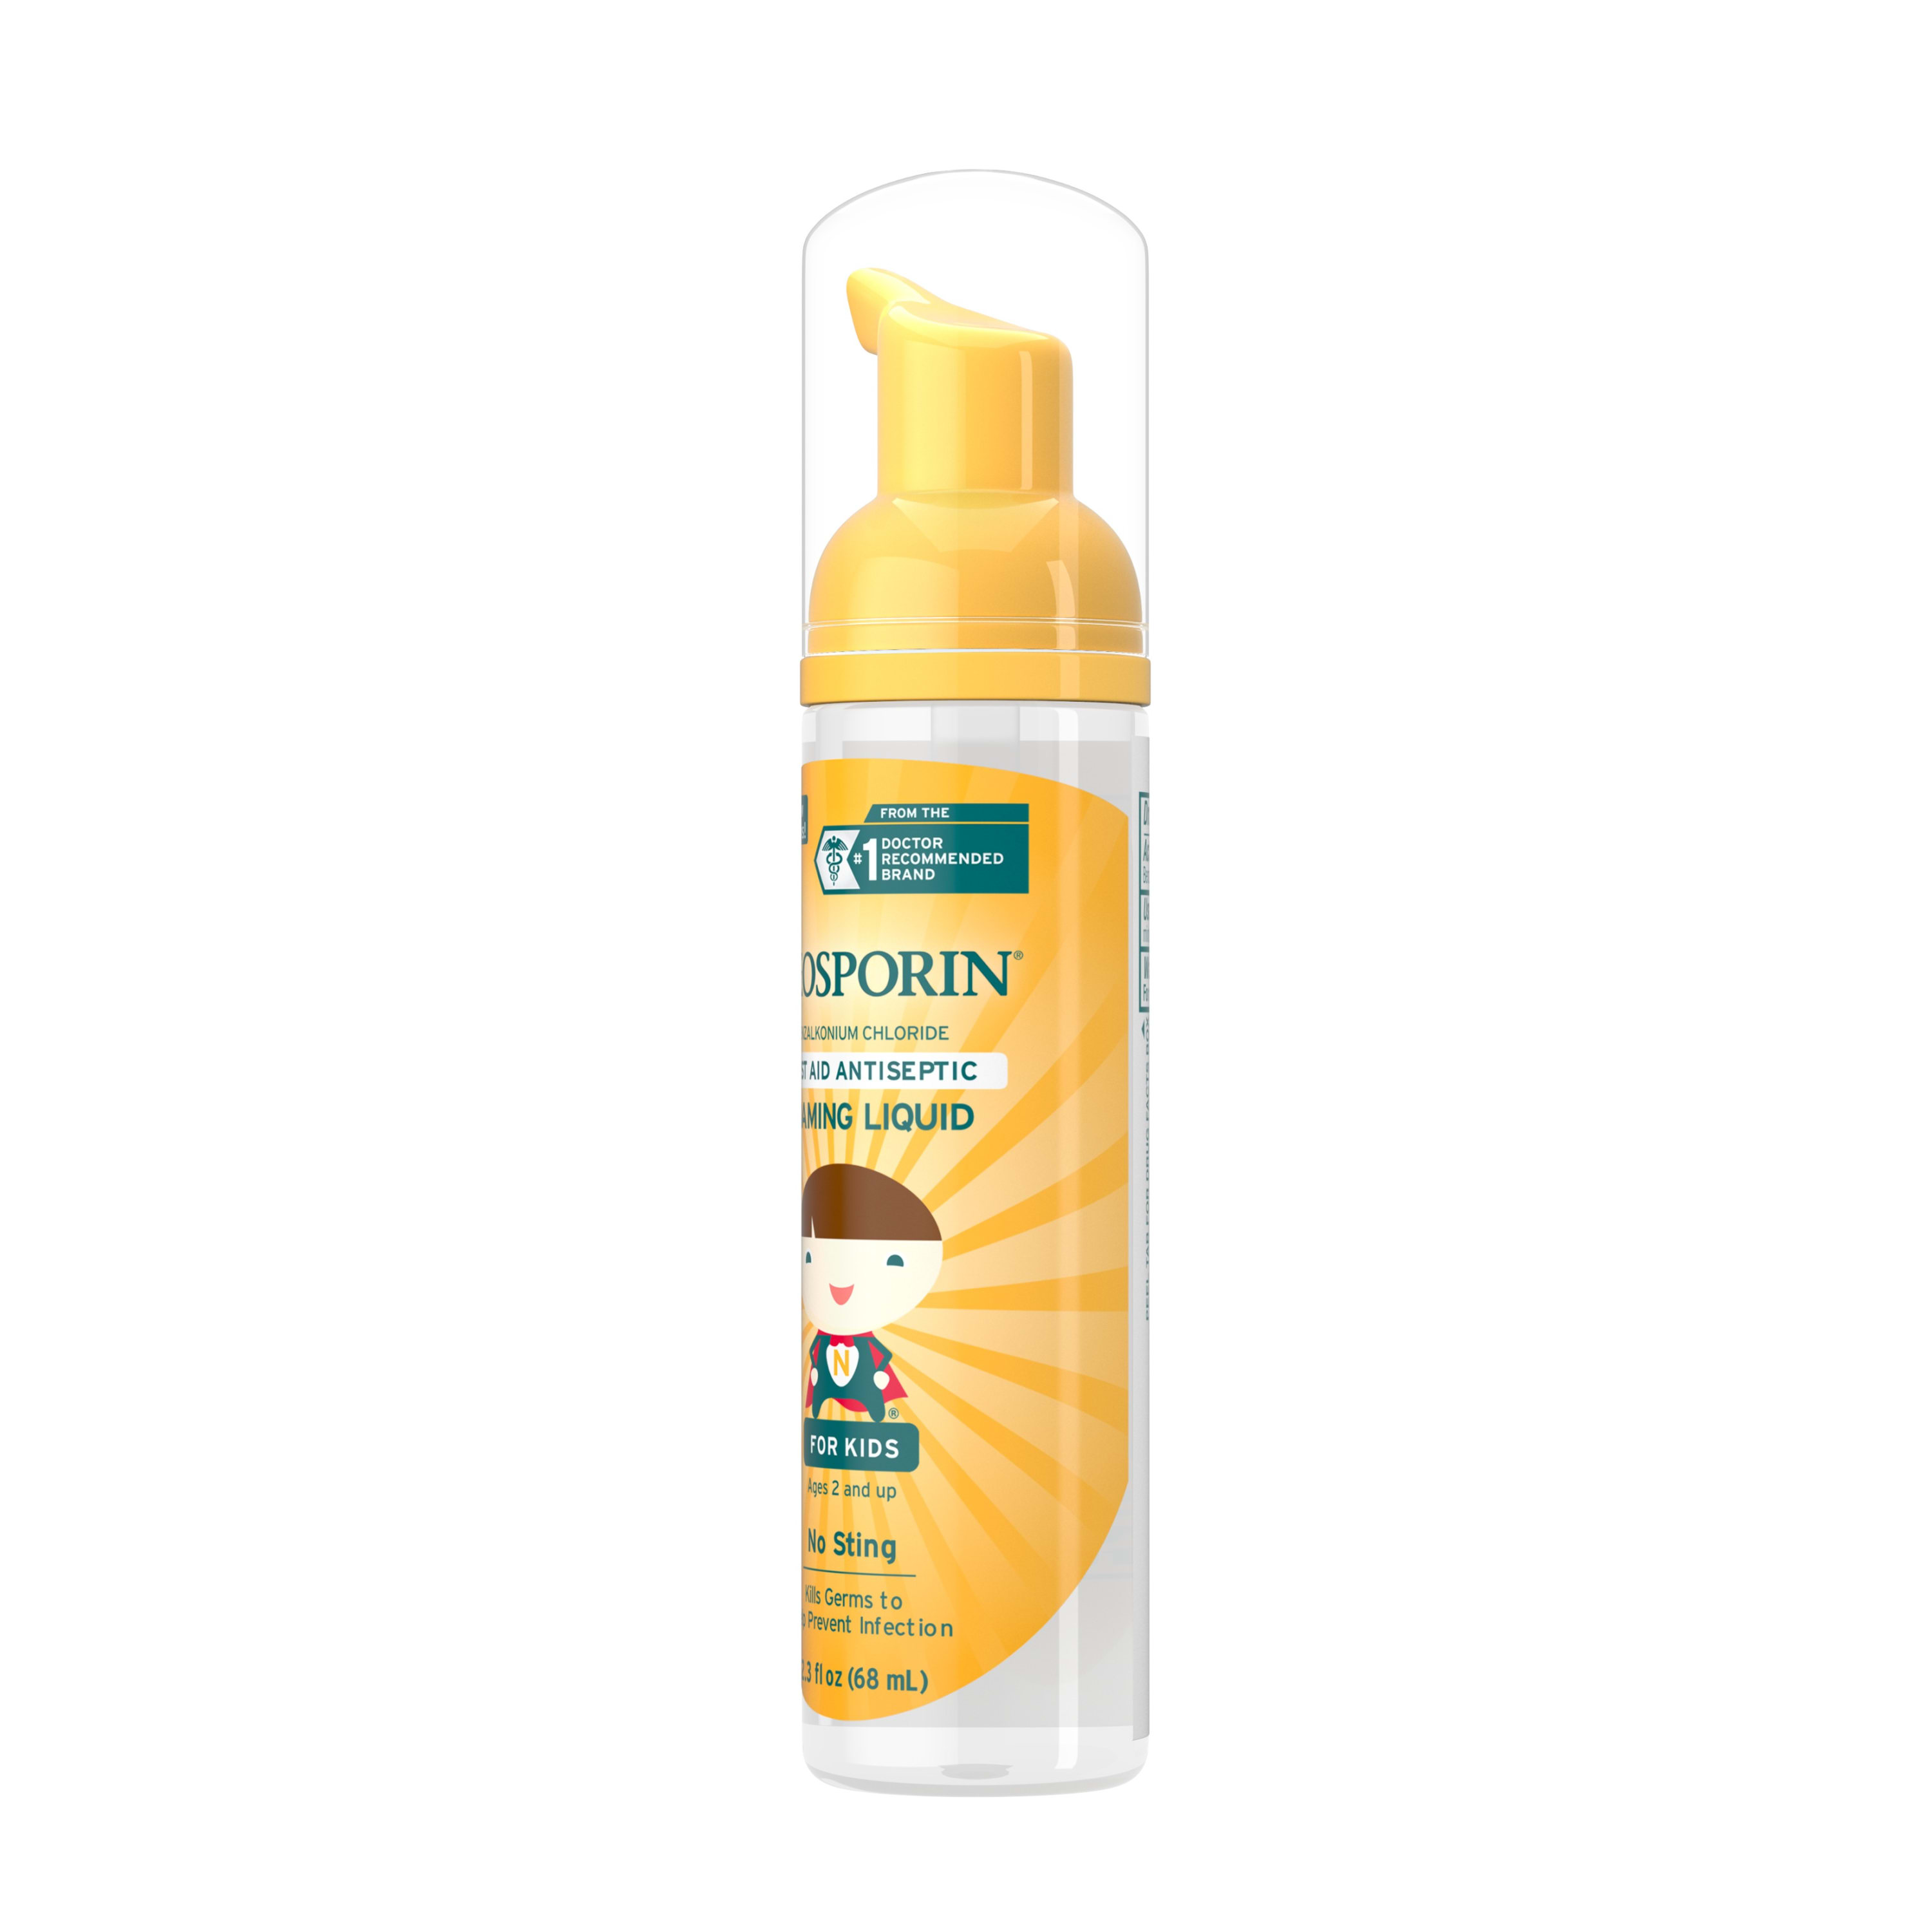 Neosporin Wound Cleanser For Kids To Help Kill Bacteria, 2.3 Oz - image 7 of 9